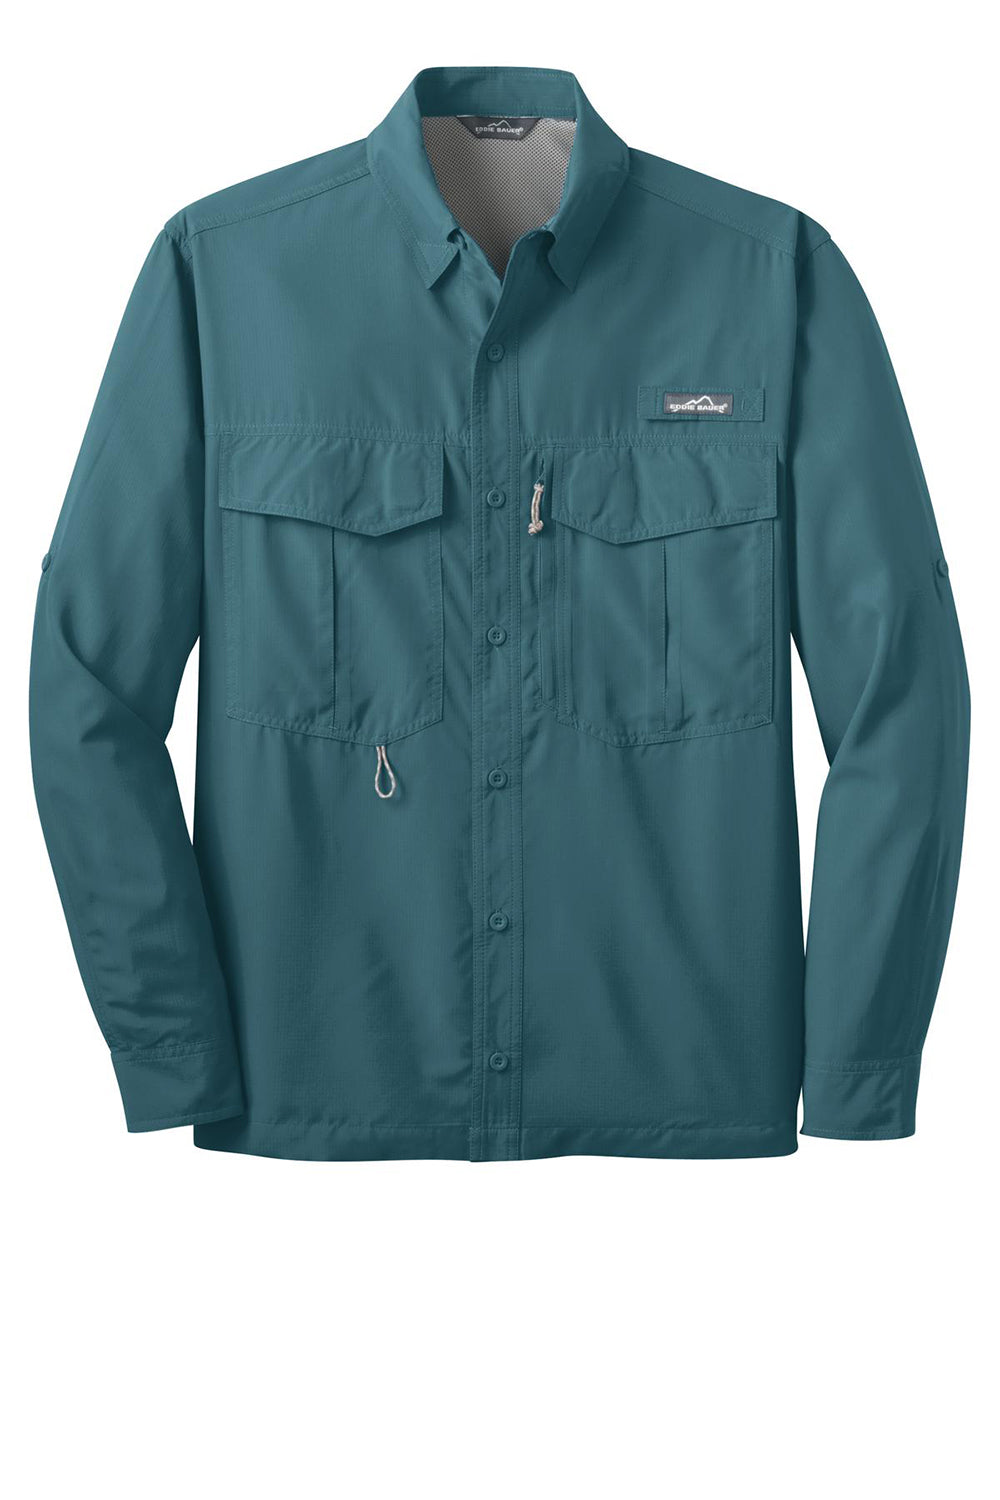 Eddie Bauer EB600 Mens Performance Fishing Moisture Wicking Long Sleeve Button Down Shirt w/ Double Pockets Gulf Teal Blue Flat Front